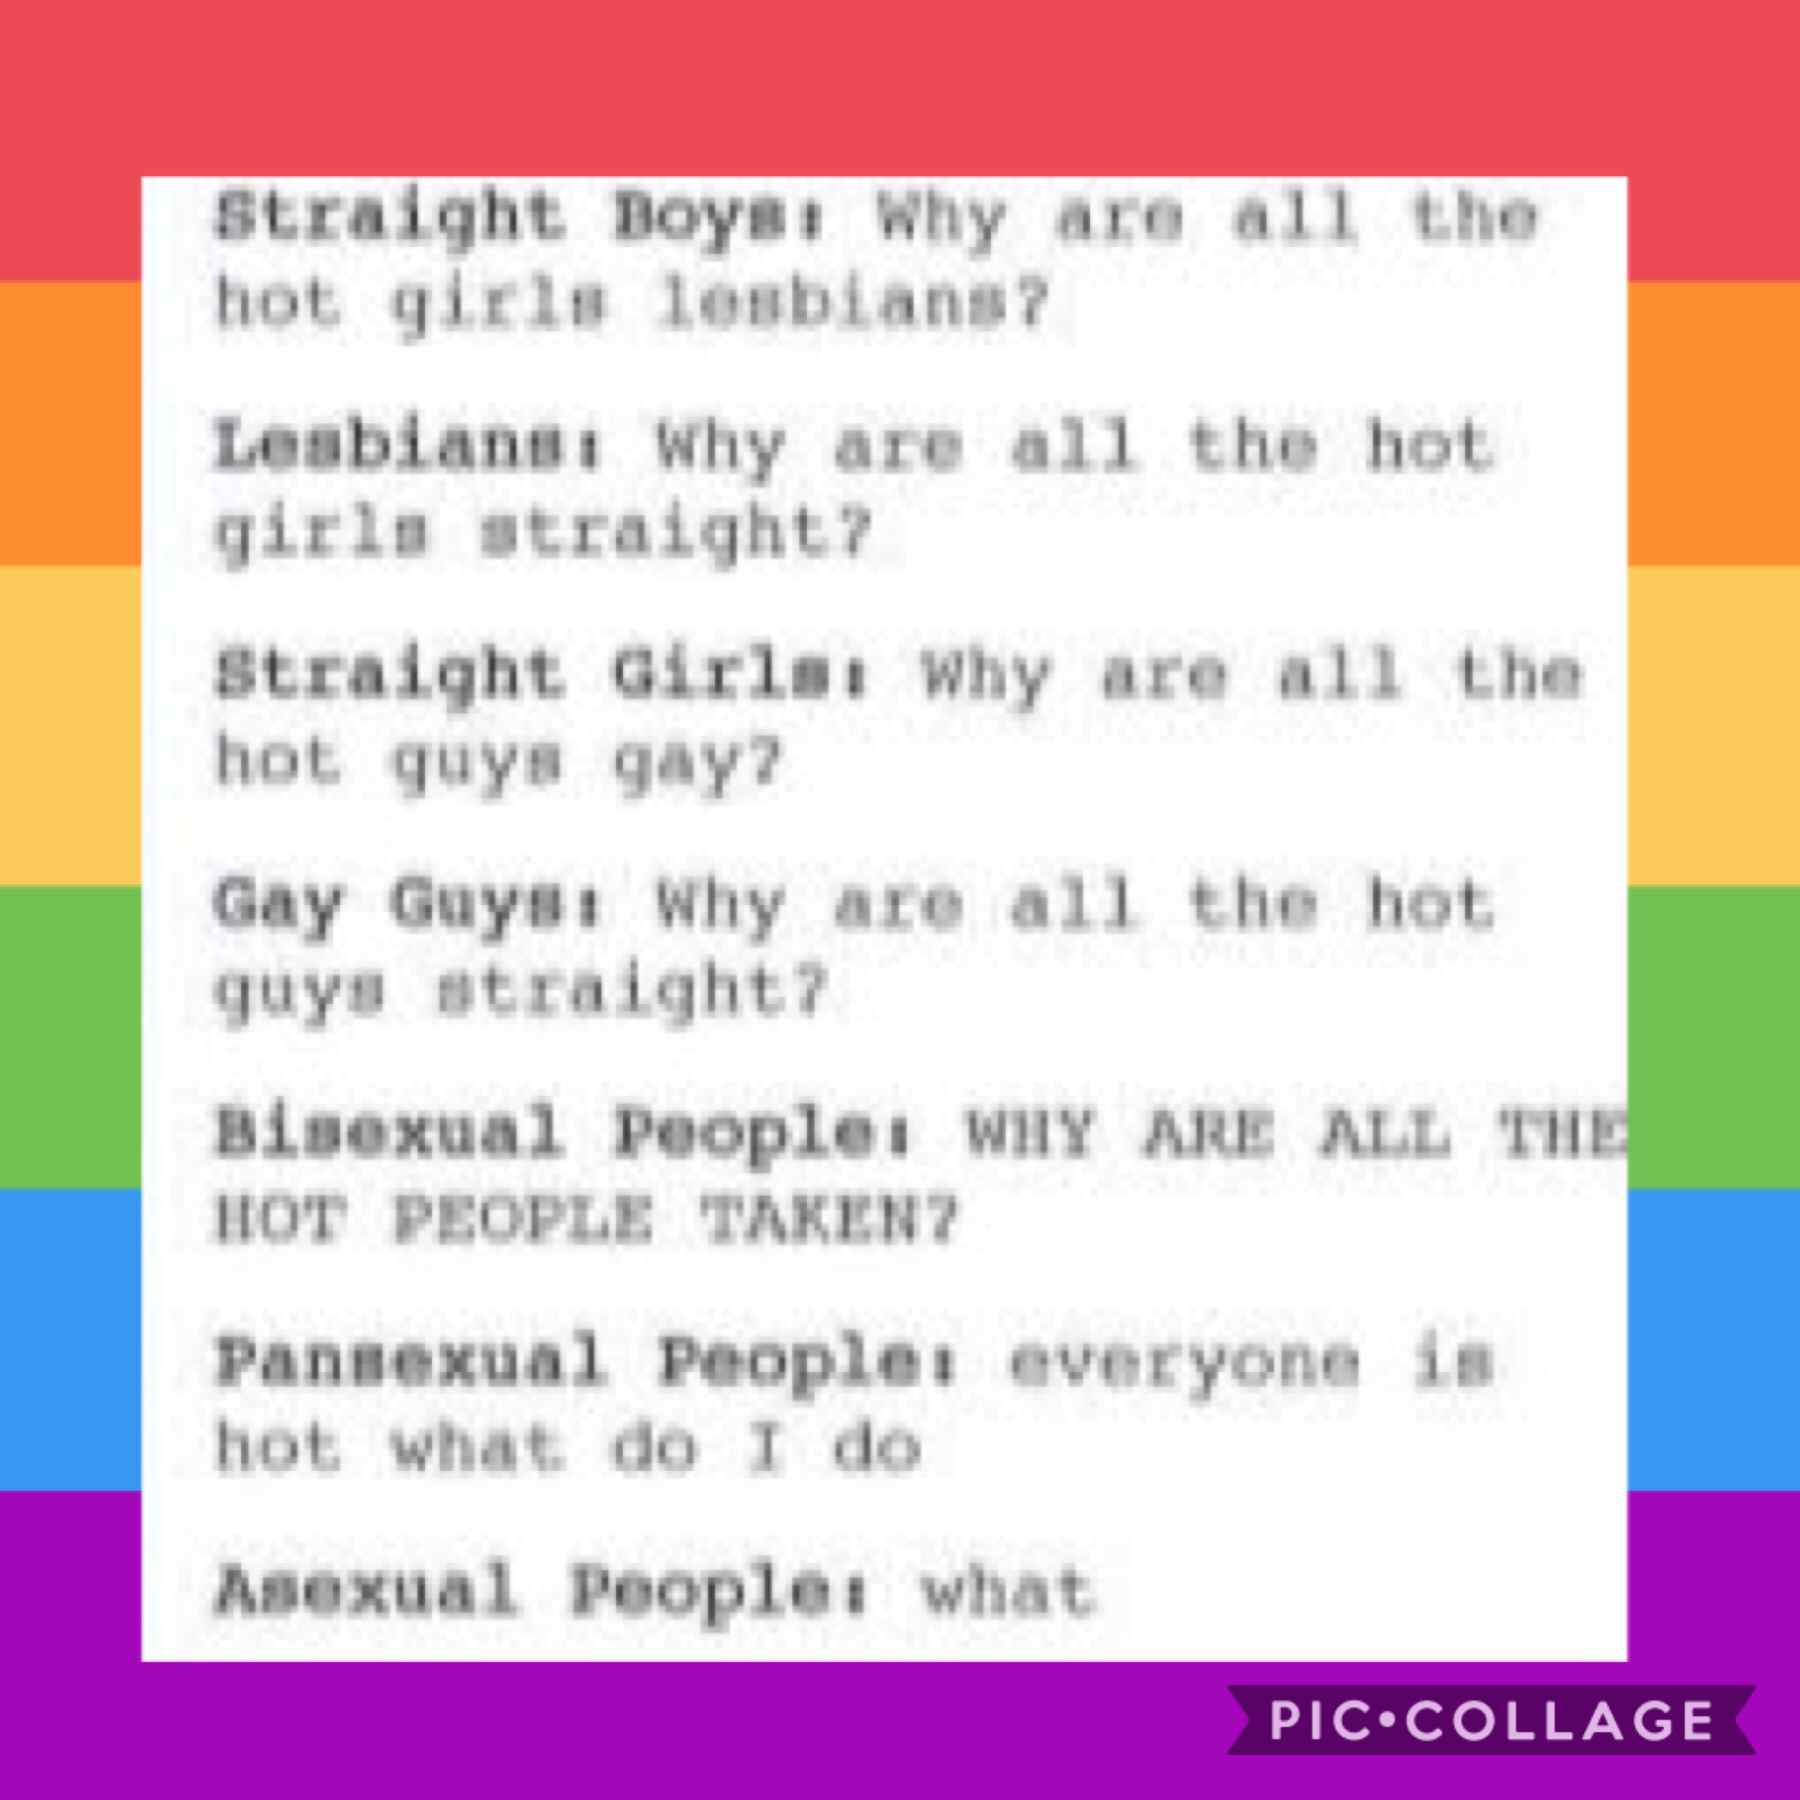 🏳️‍🌈TAP🏳️‍🌈
HAPPY PRIDE MONTH GAYSSS
as you all know i’m asexual
but i still need to tell y’all one thing...
i’m also bi-romantic djskdk
yea i like girls too,, so what?
if u don’t like it then unfollow me, block me, do whatever the fūčk you want. i am wha